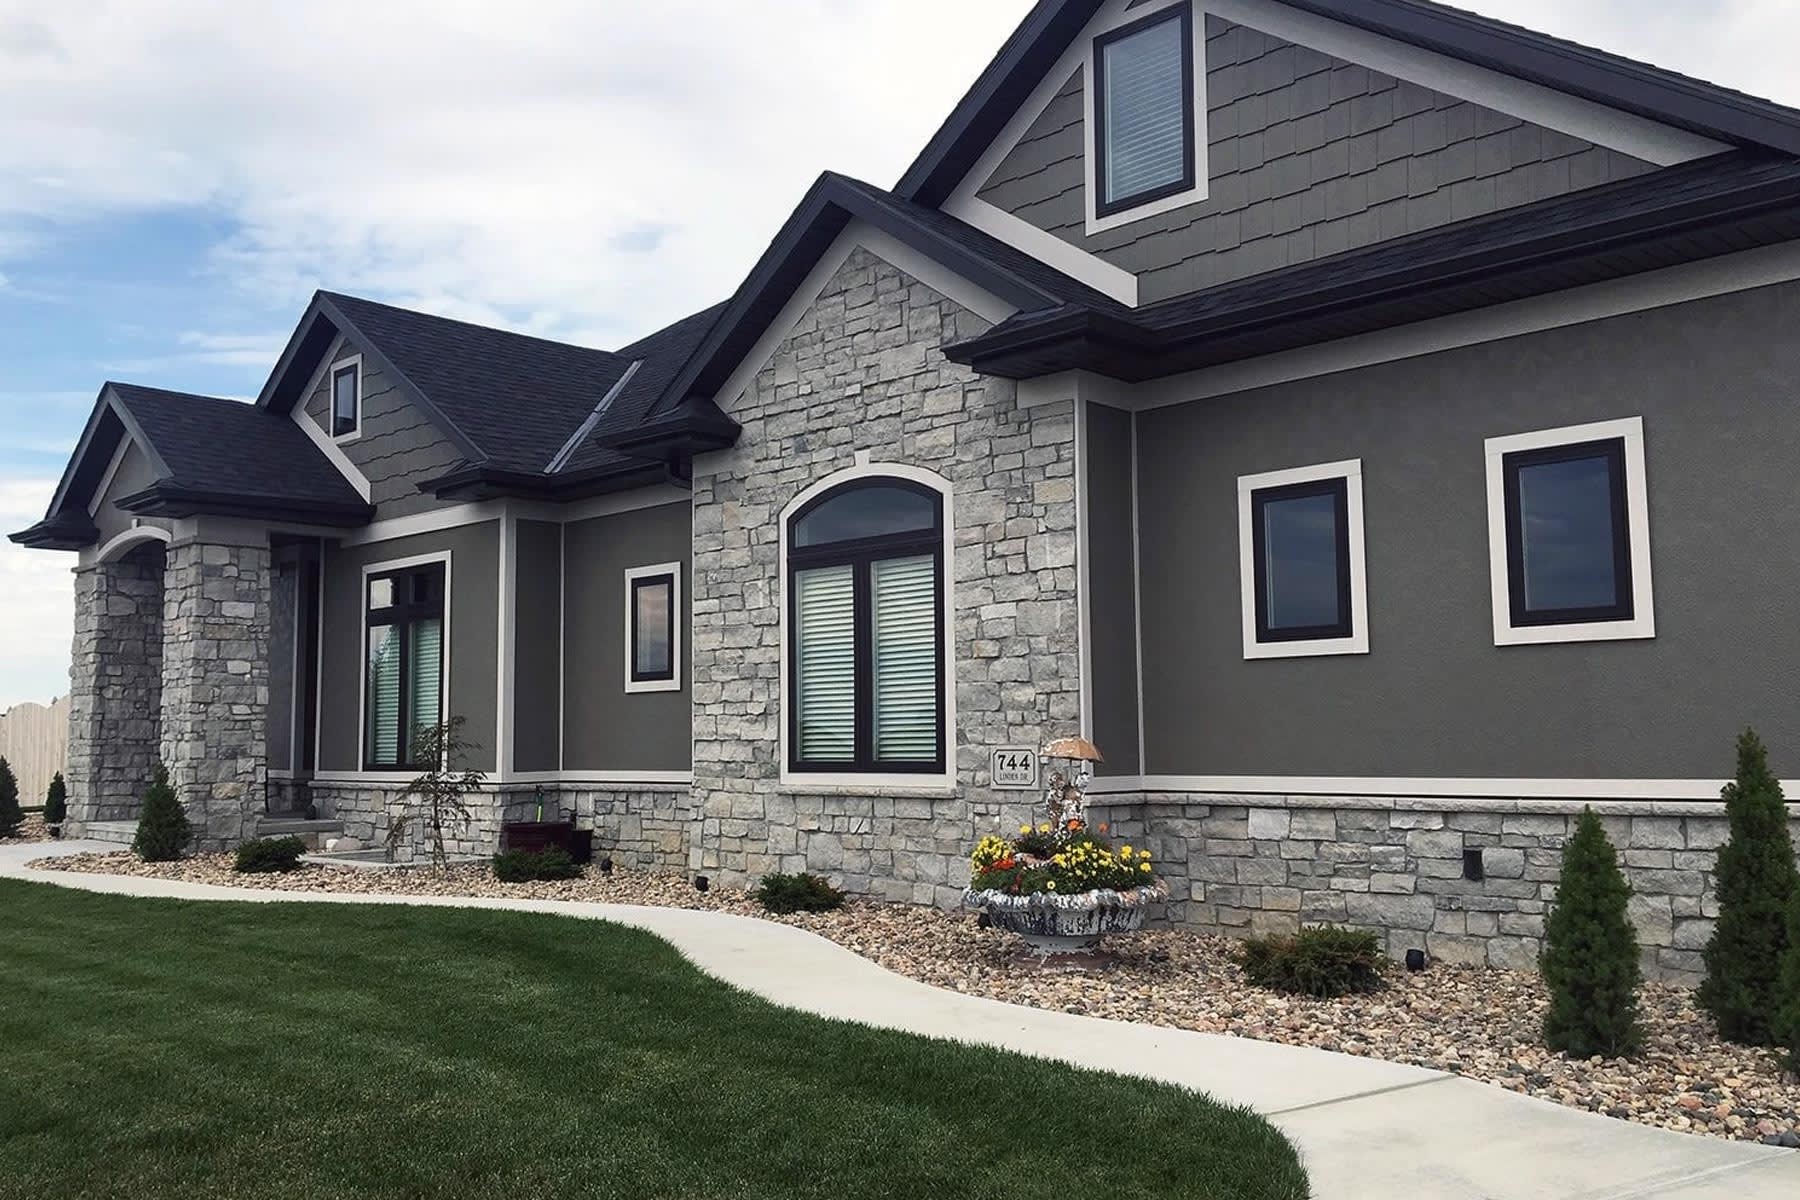 How much does stone veneer siding cost to install?